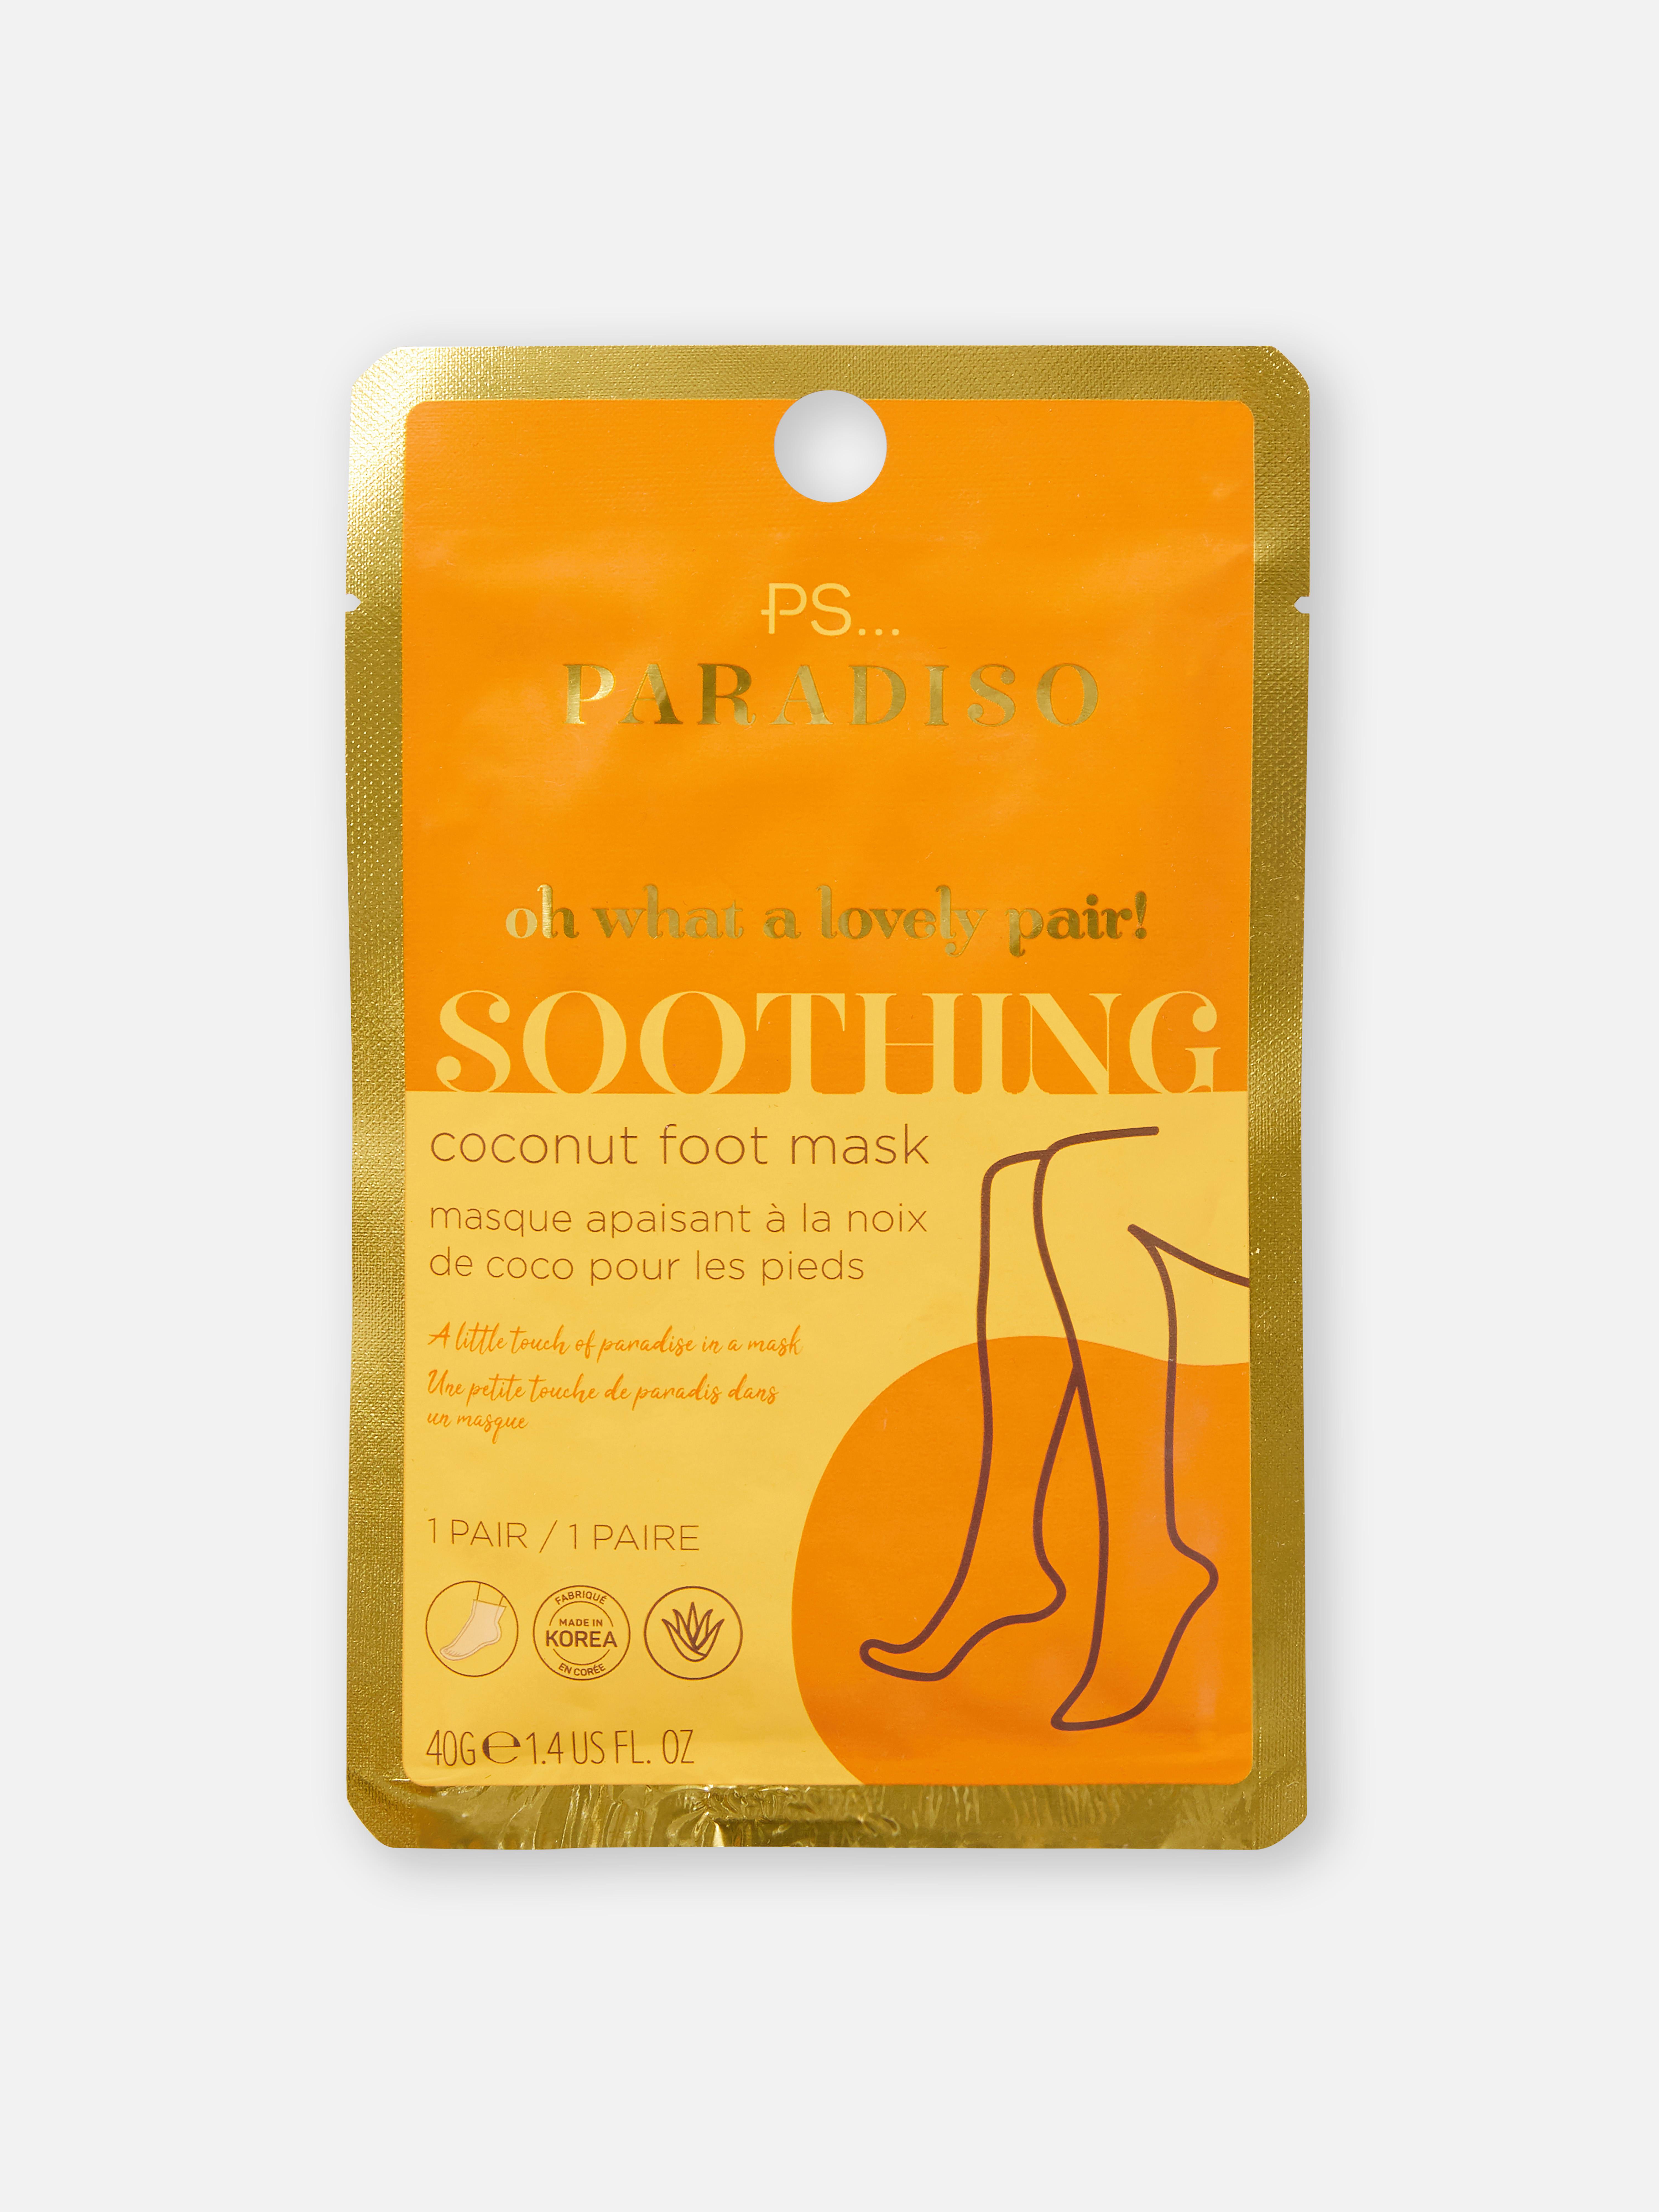 PS Soothing Coconut Foot Mask